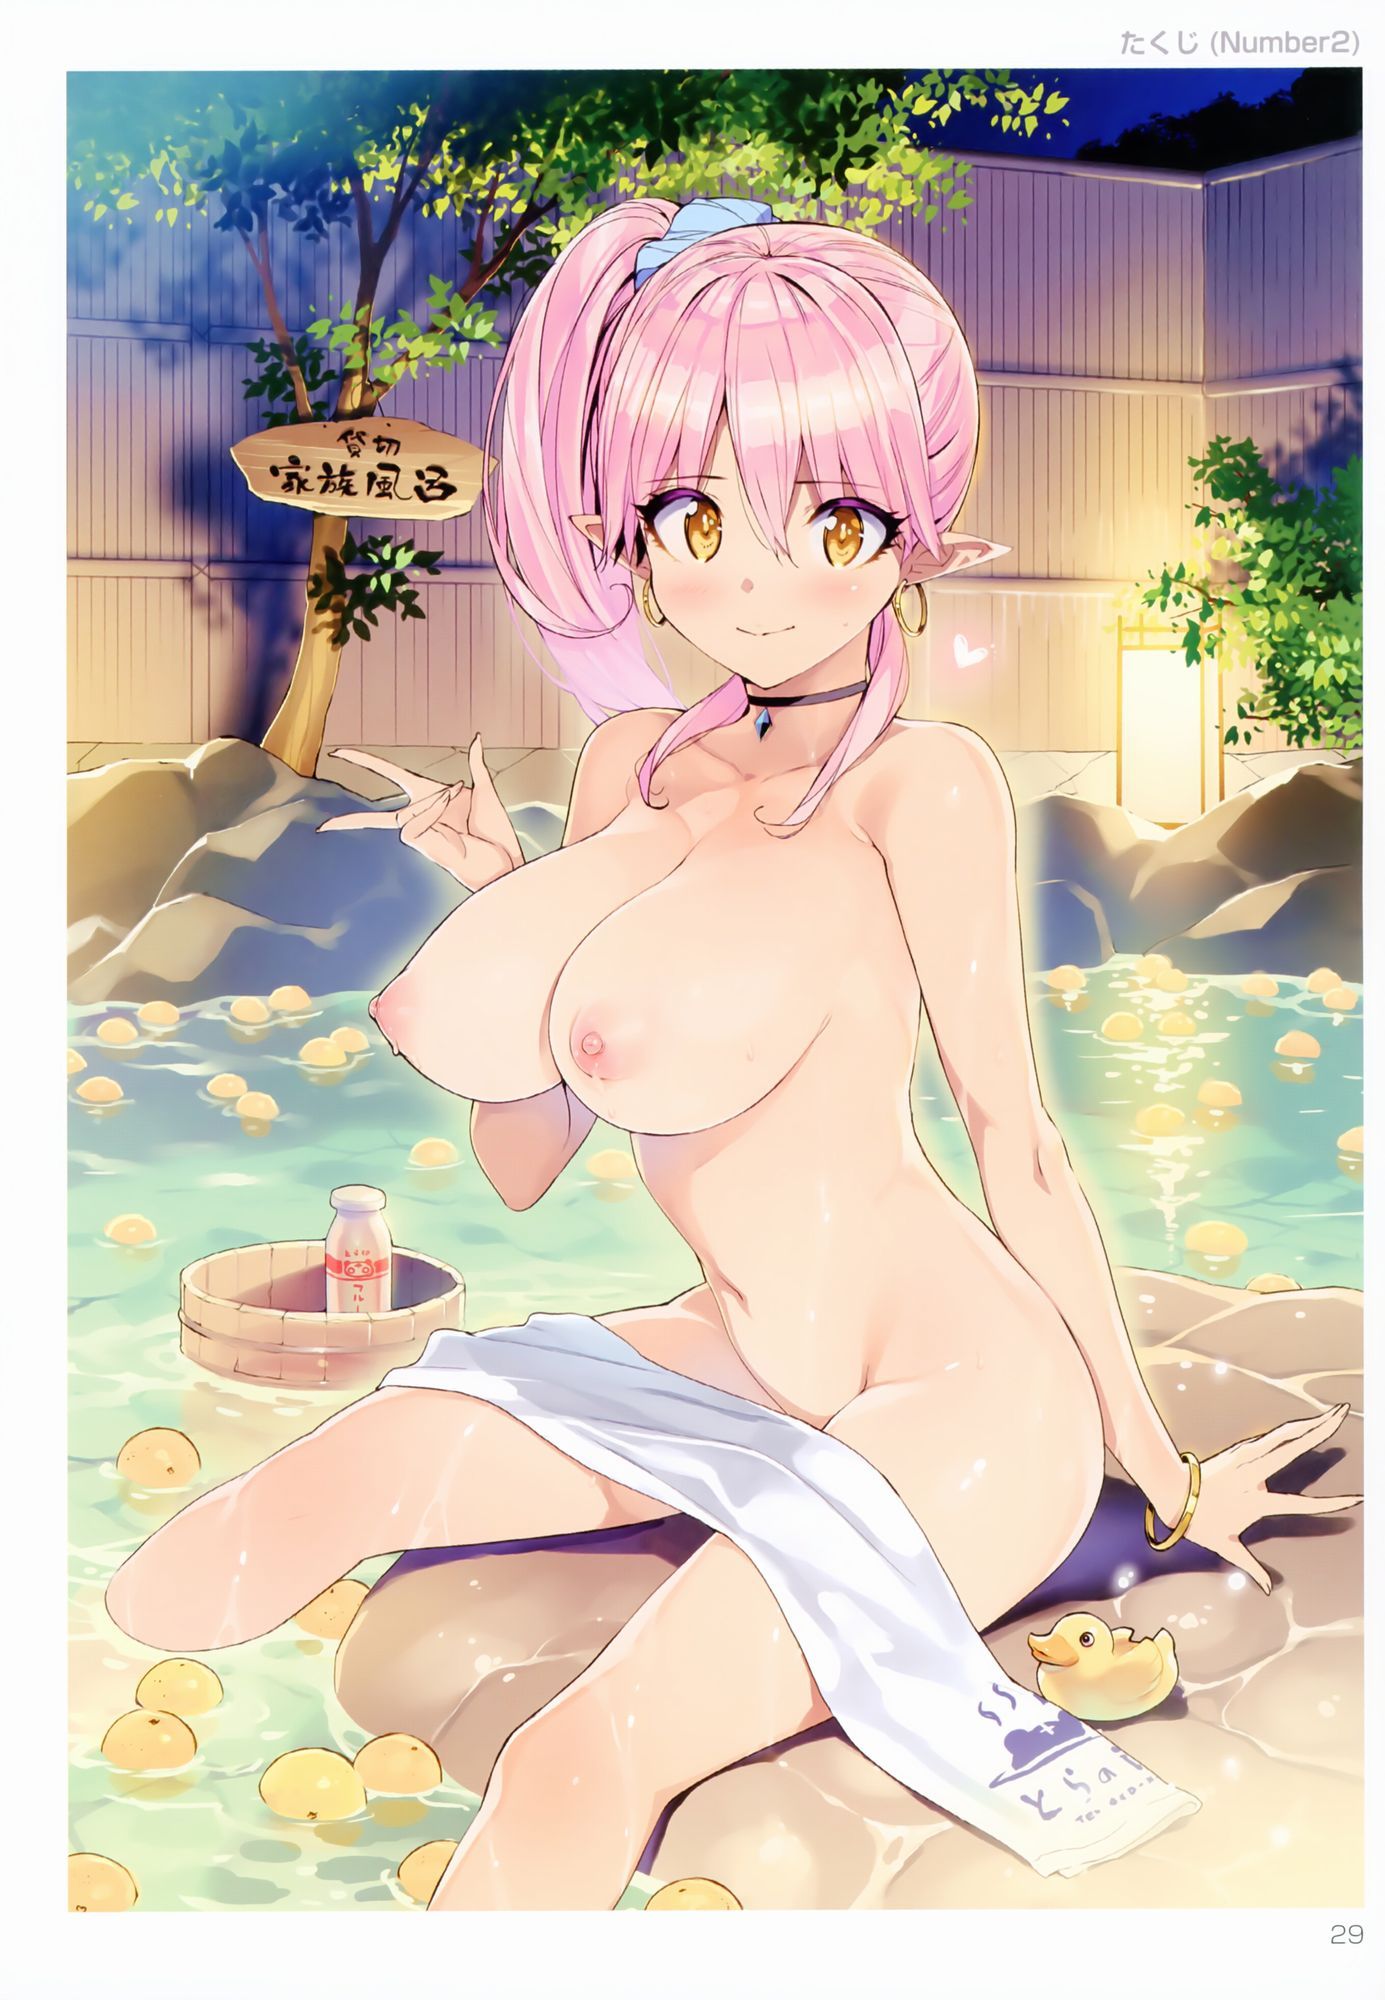 Erotic anime summary Beautiful girls relaxing in baths and hot springs [secondary erotic] 4